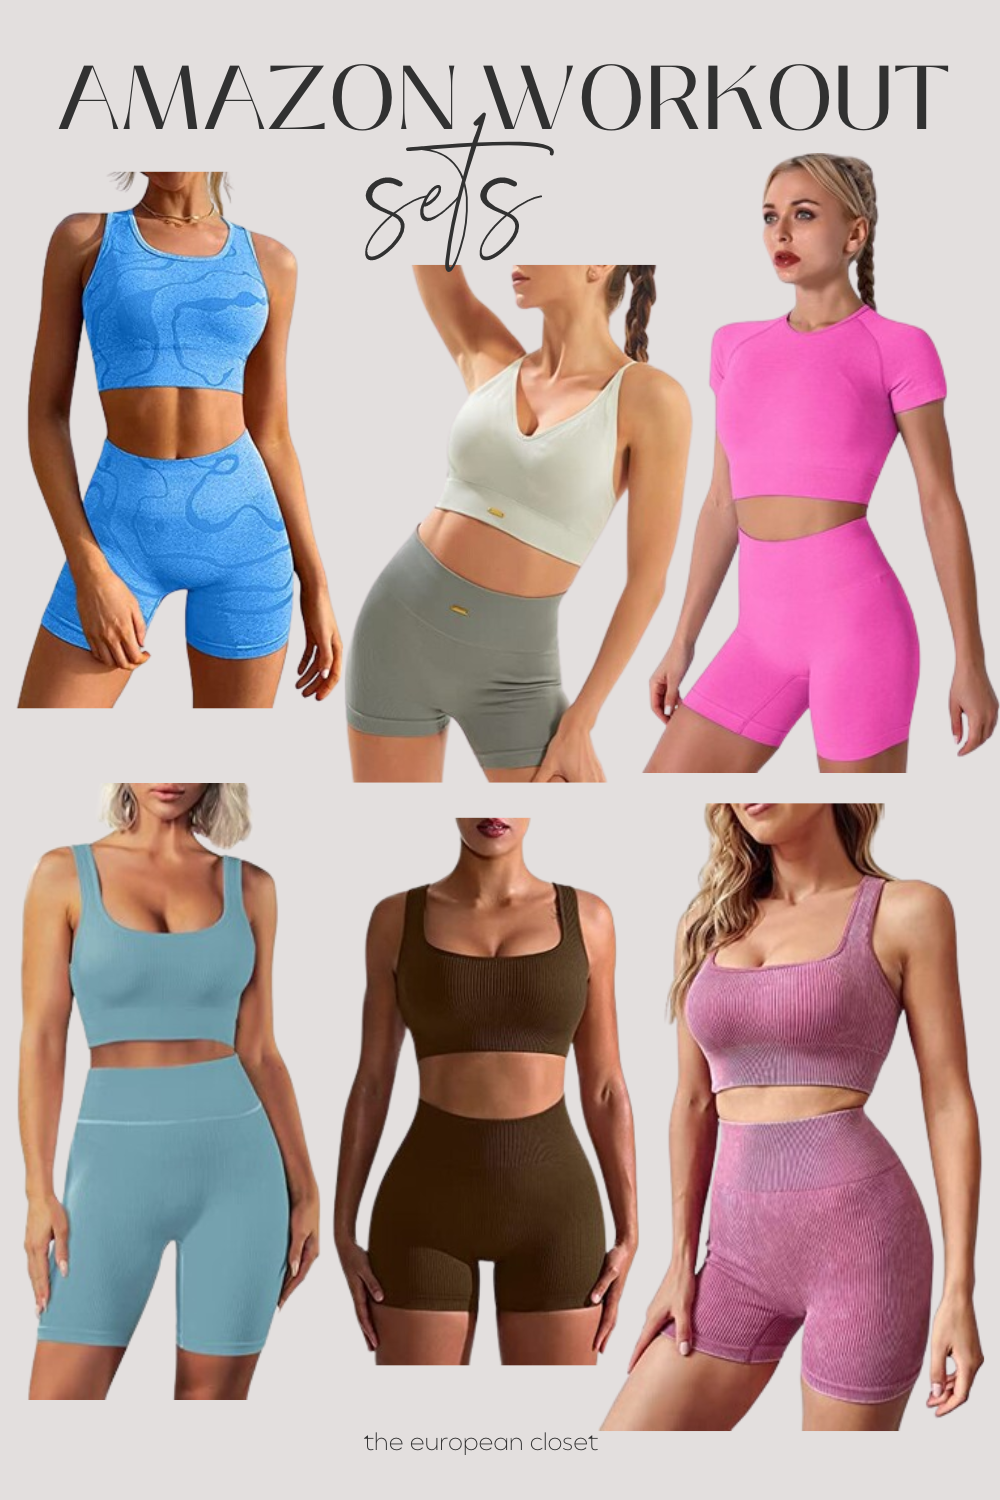 Are you looking for the best workout clothes on Amazon that will inspire you to live the "that girl" life? Well, look no further! These workout sets are just the answer for people who are looking for good quality, affordable workout sets that will make them want to work out